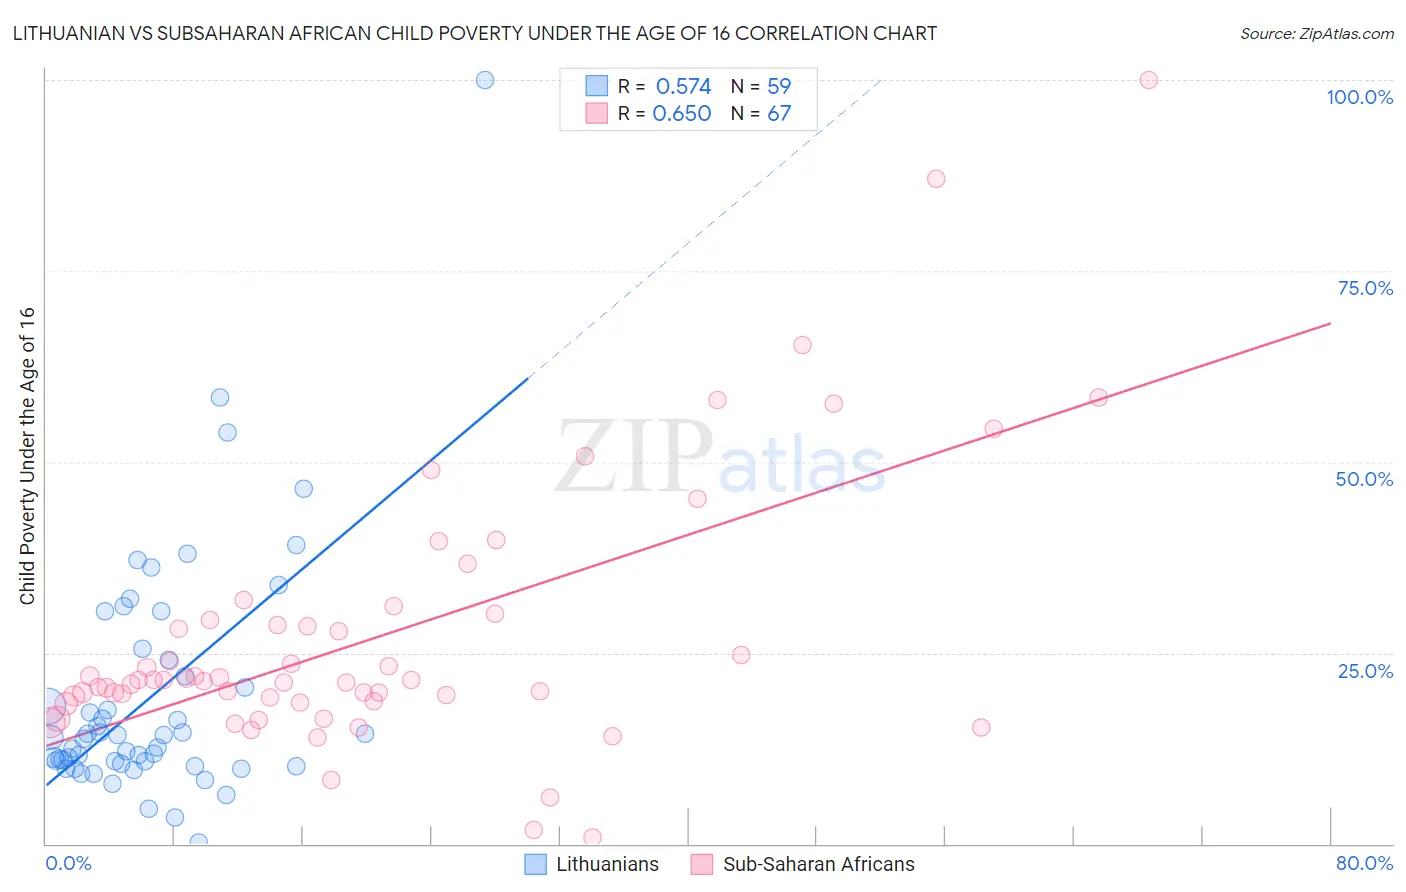 Lithuanian vs Subsaharan African Child Poverty Under the Age of 16